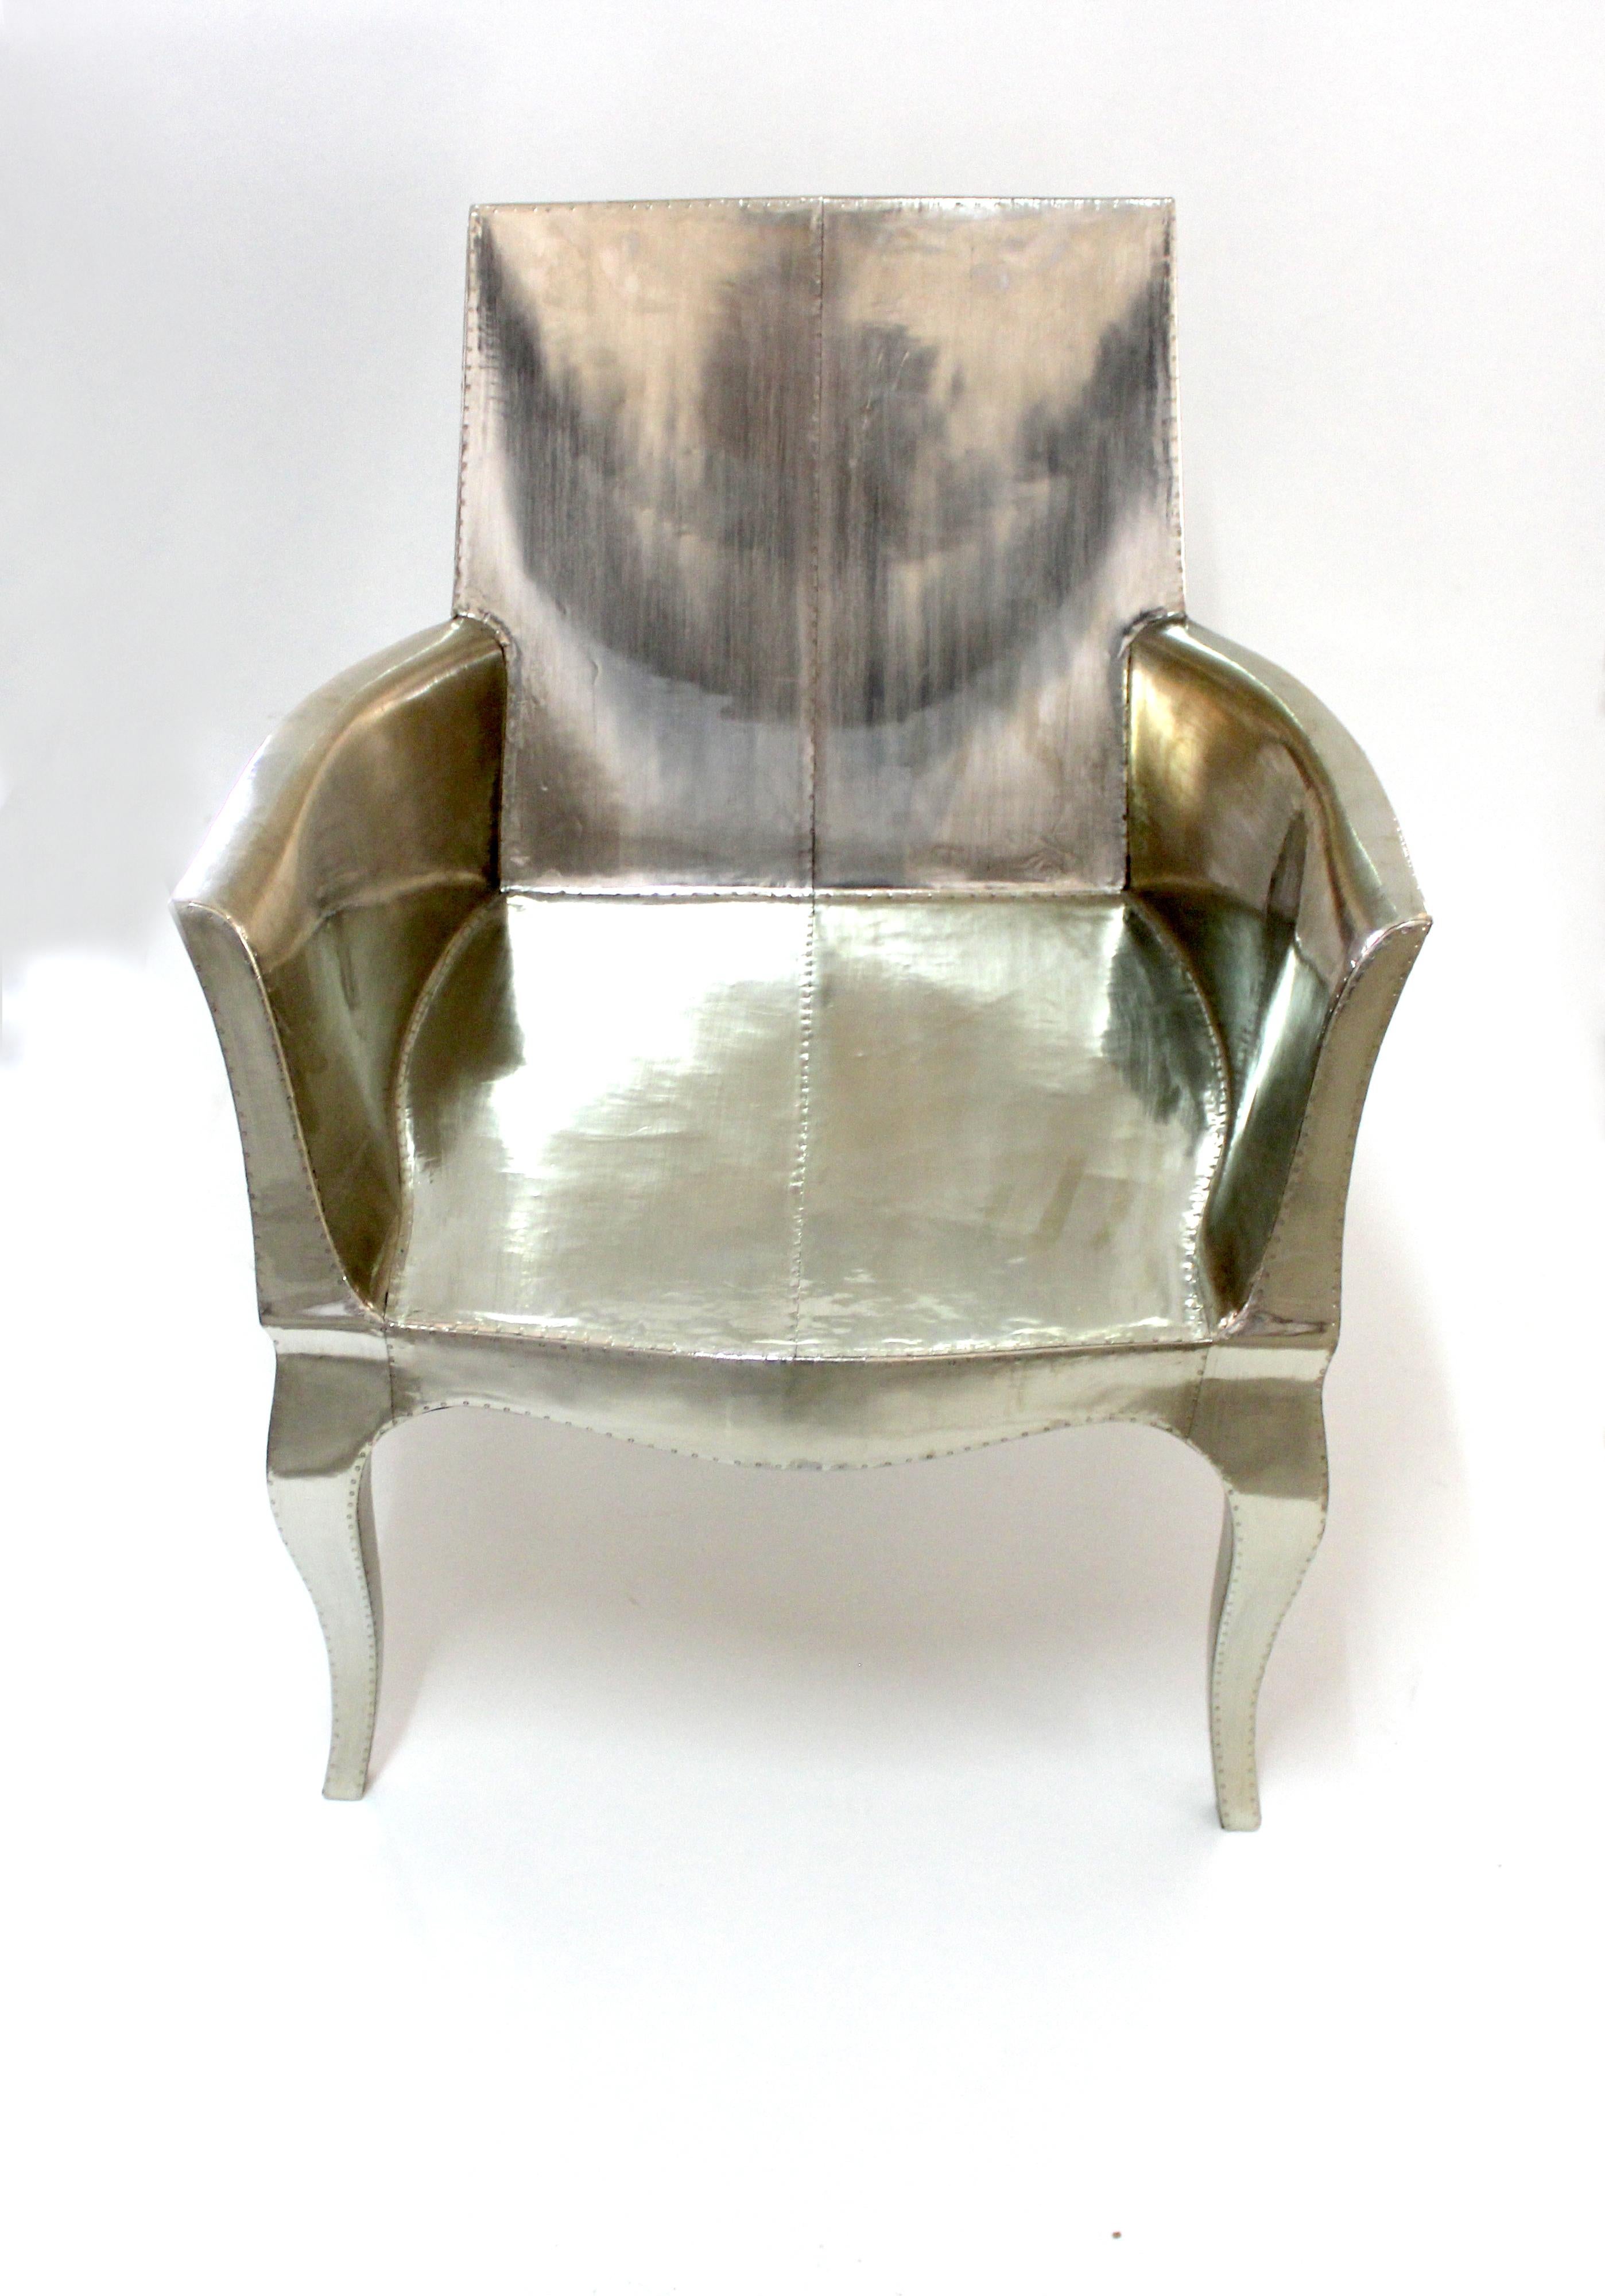 Antique Art Deco Chairs in Smooth Antique by Paul Mathieu for S. Odegard For Sale 7